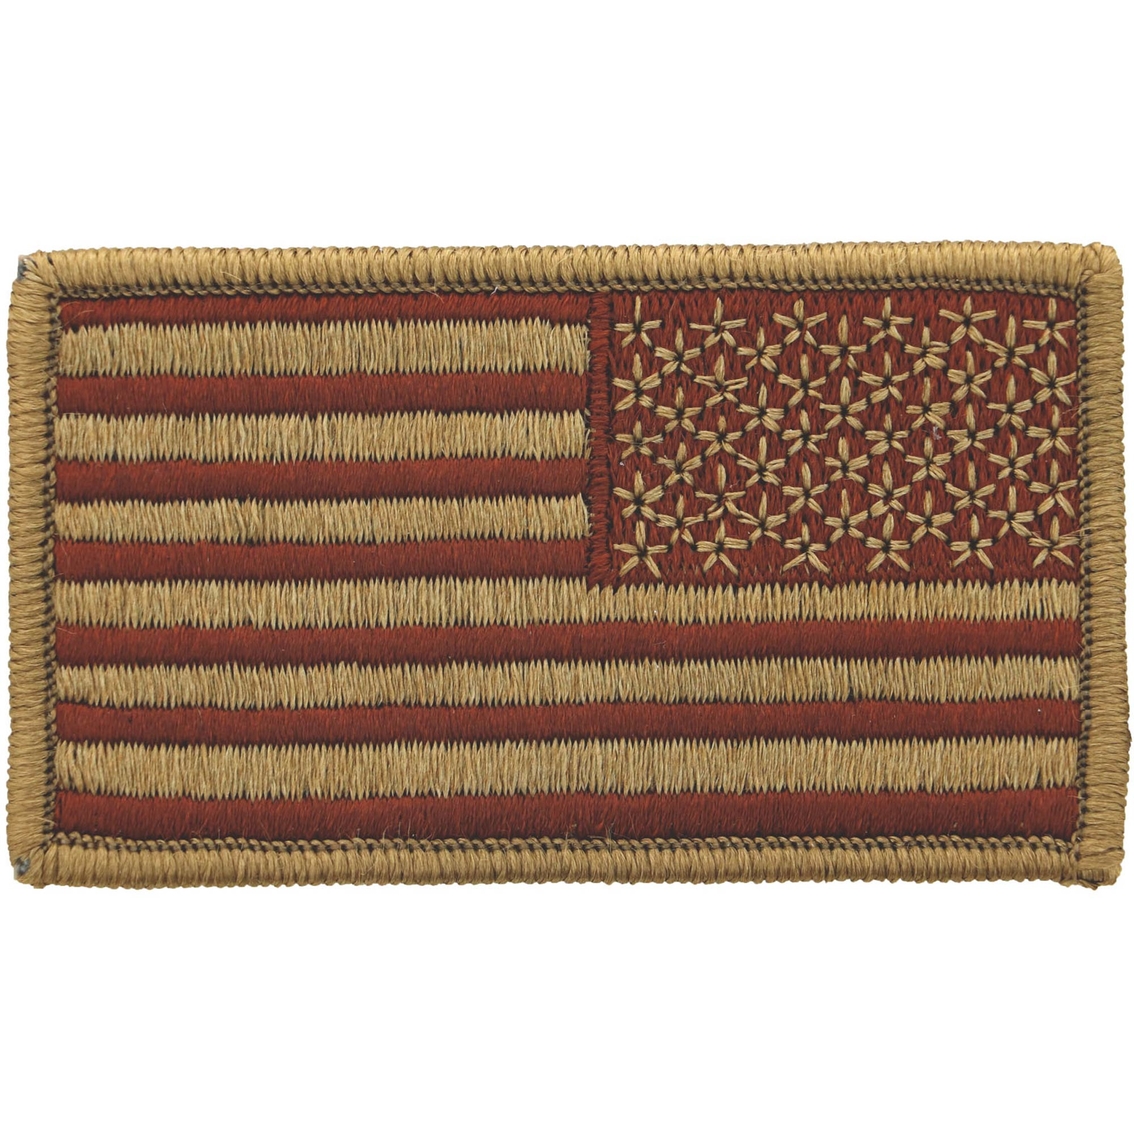 US Air Force OCP and Spice Brown Flag with Hook Fastener